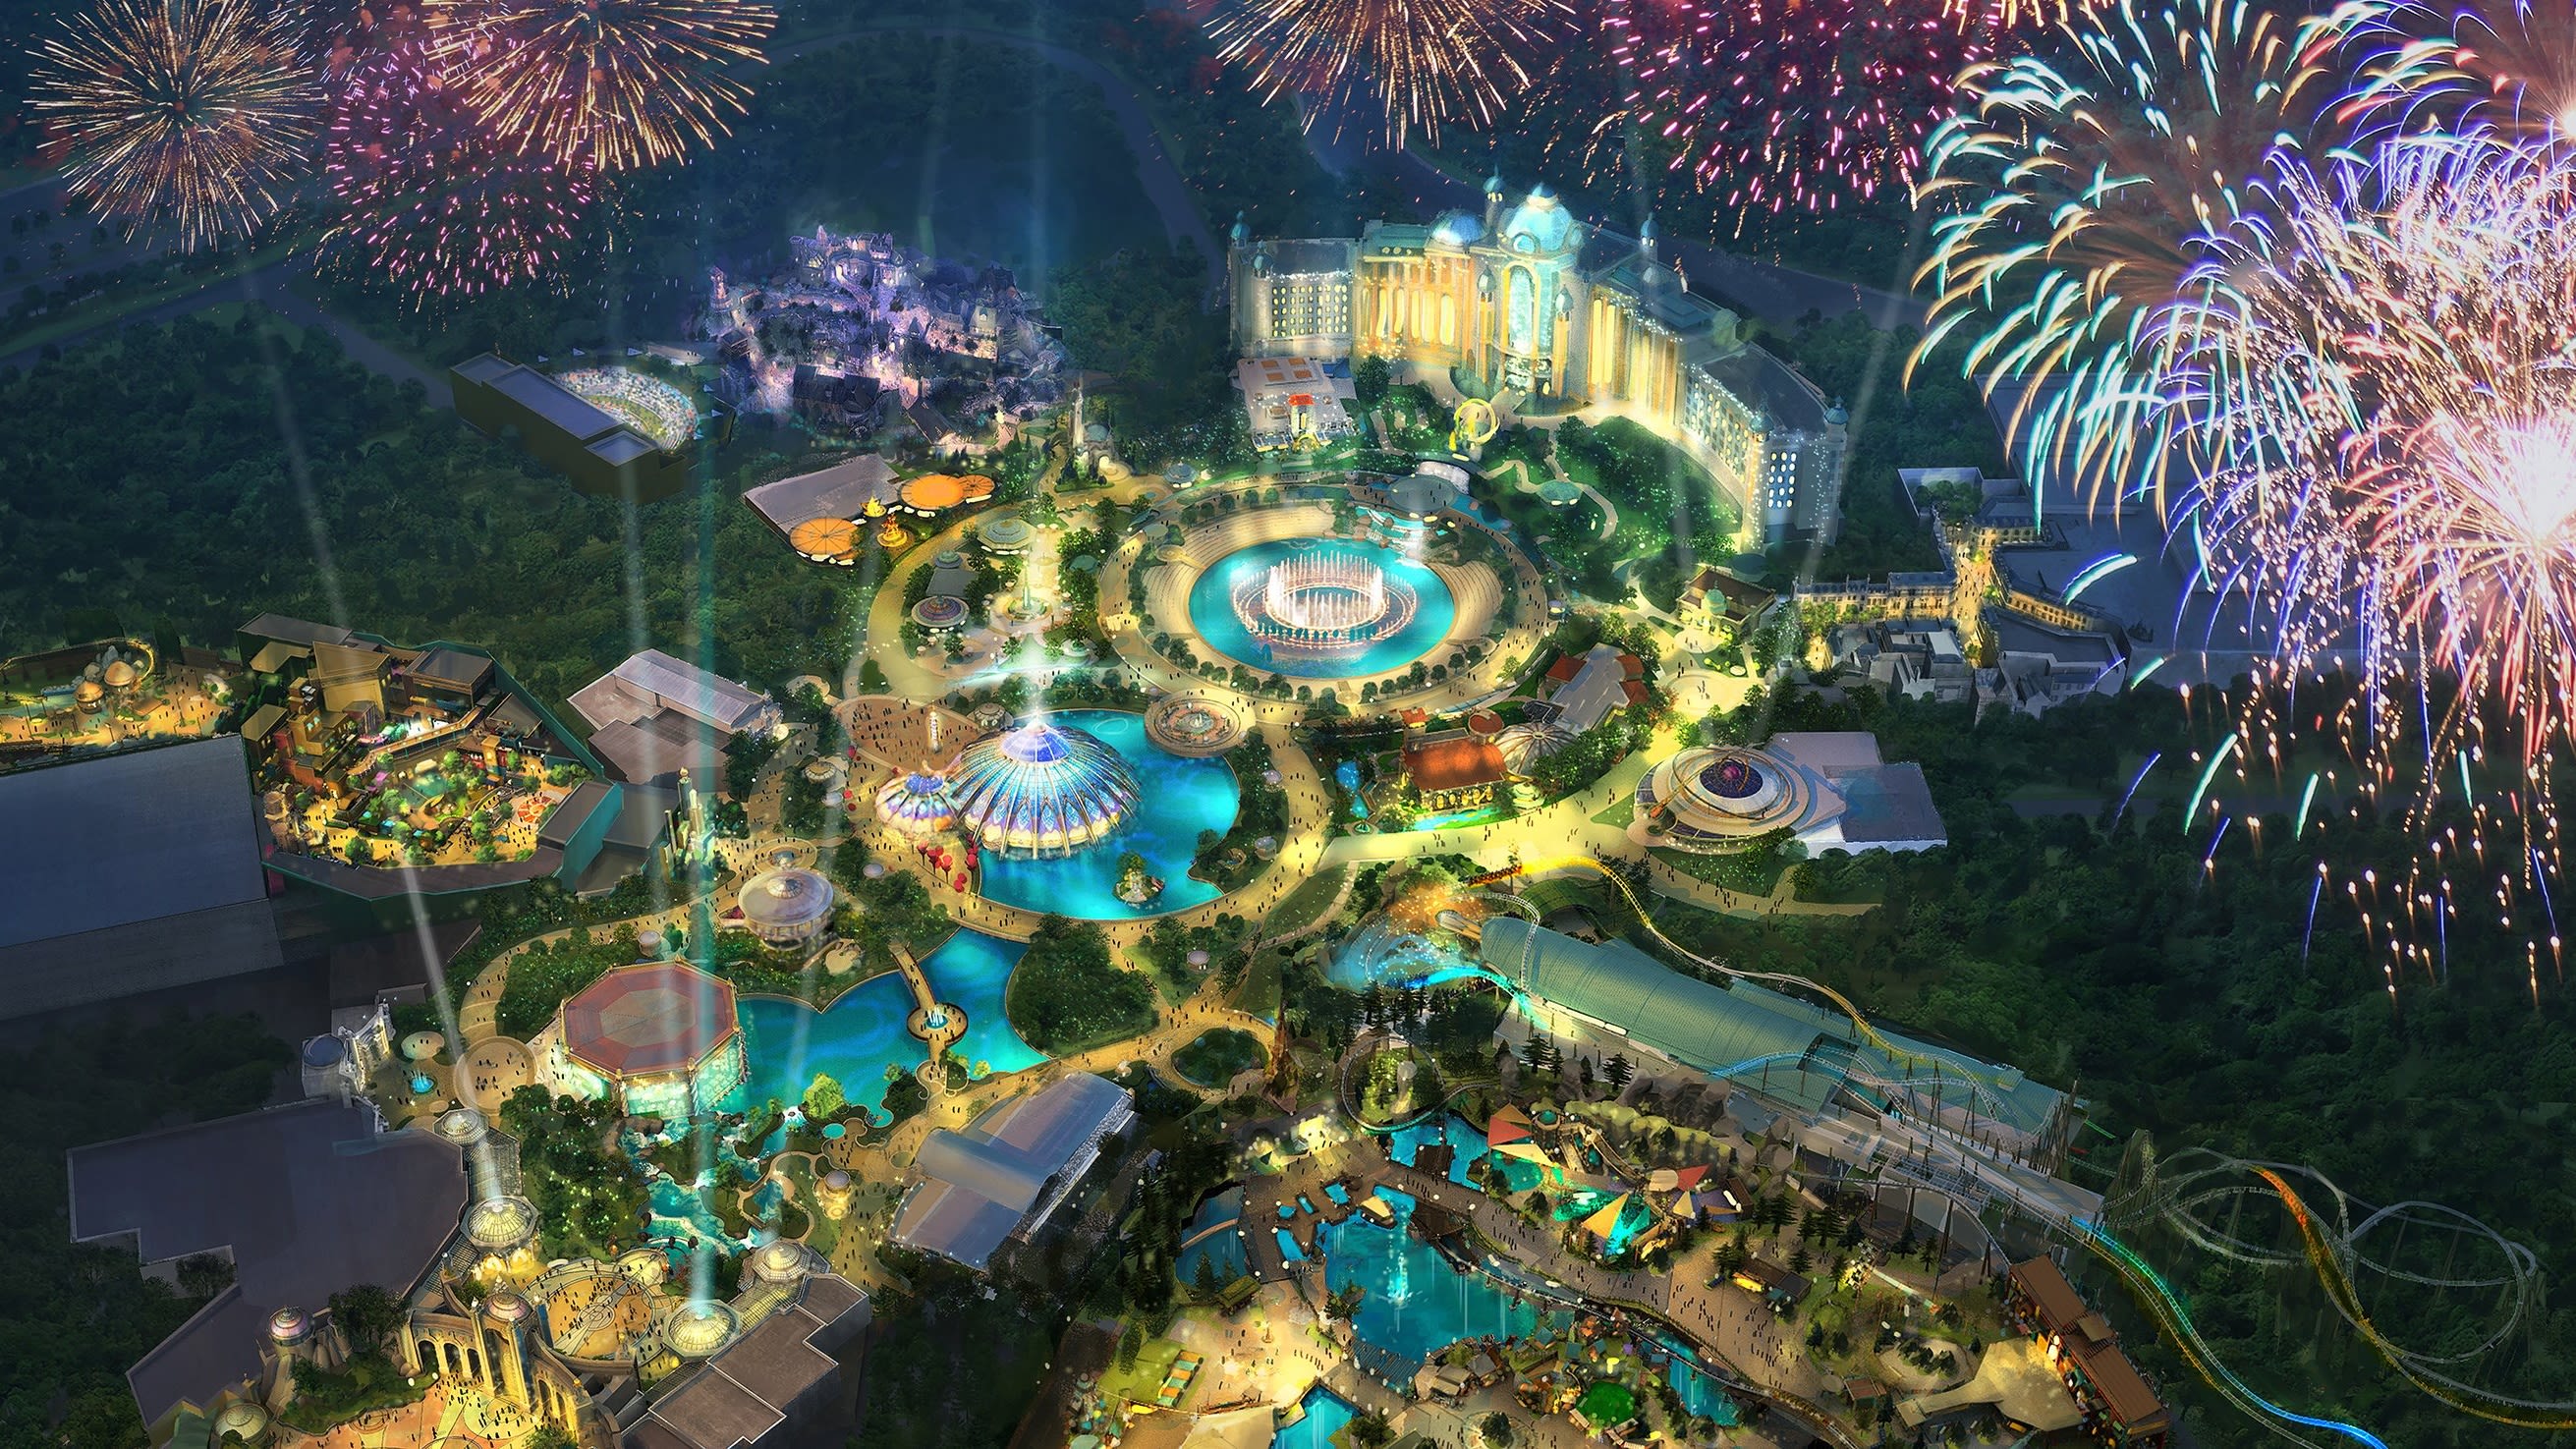 Universal is building a new theme park in Florida